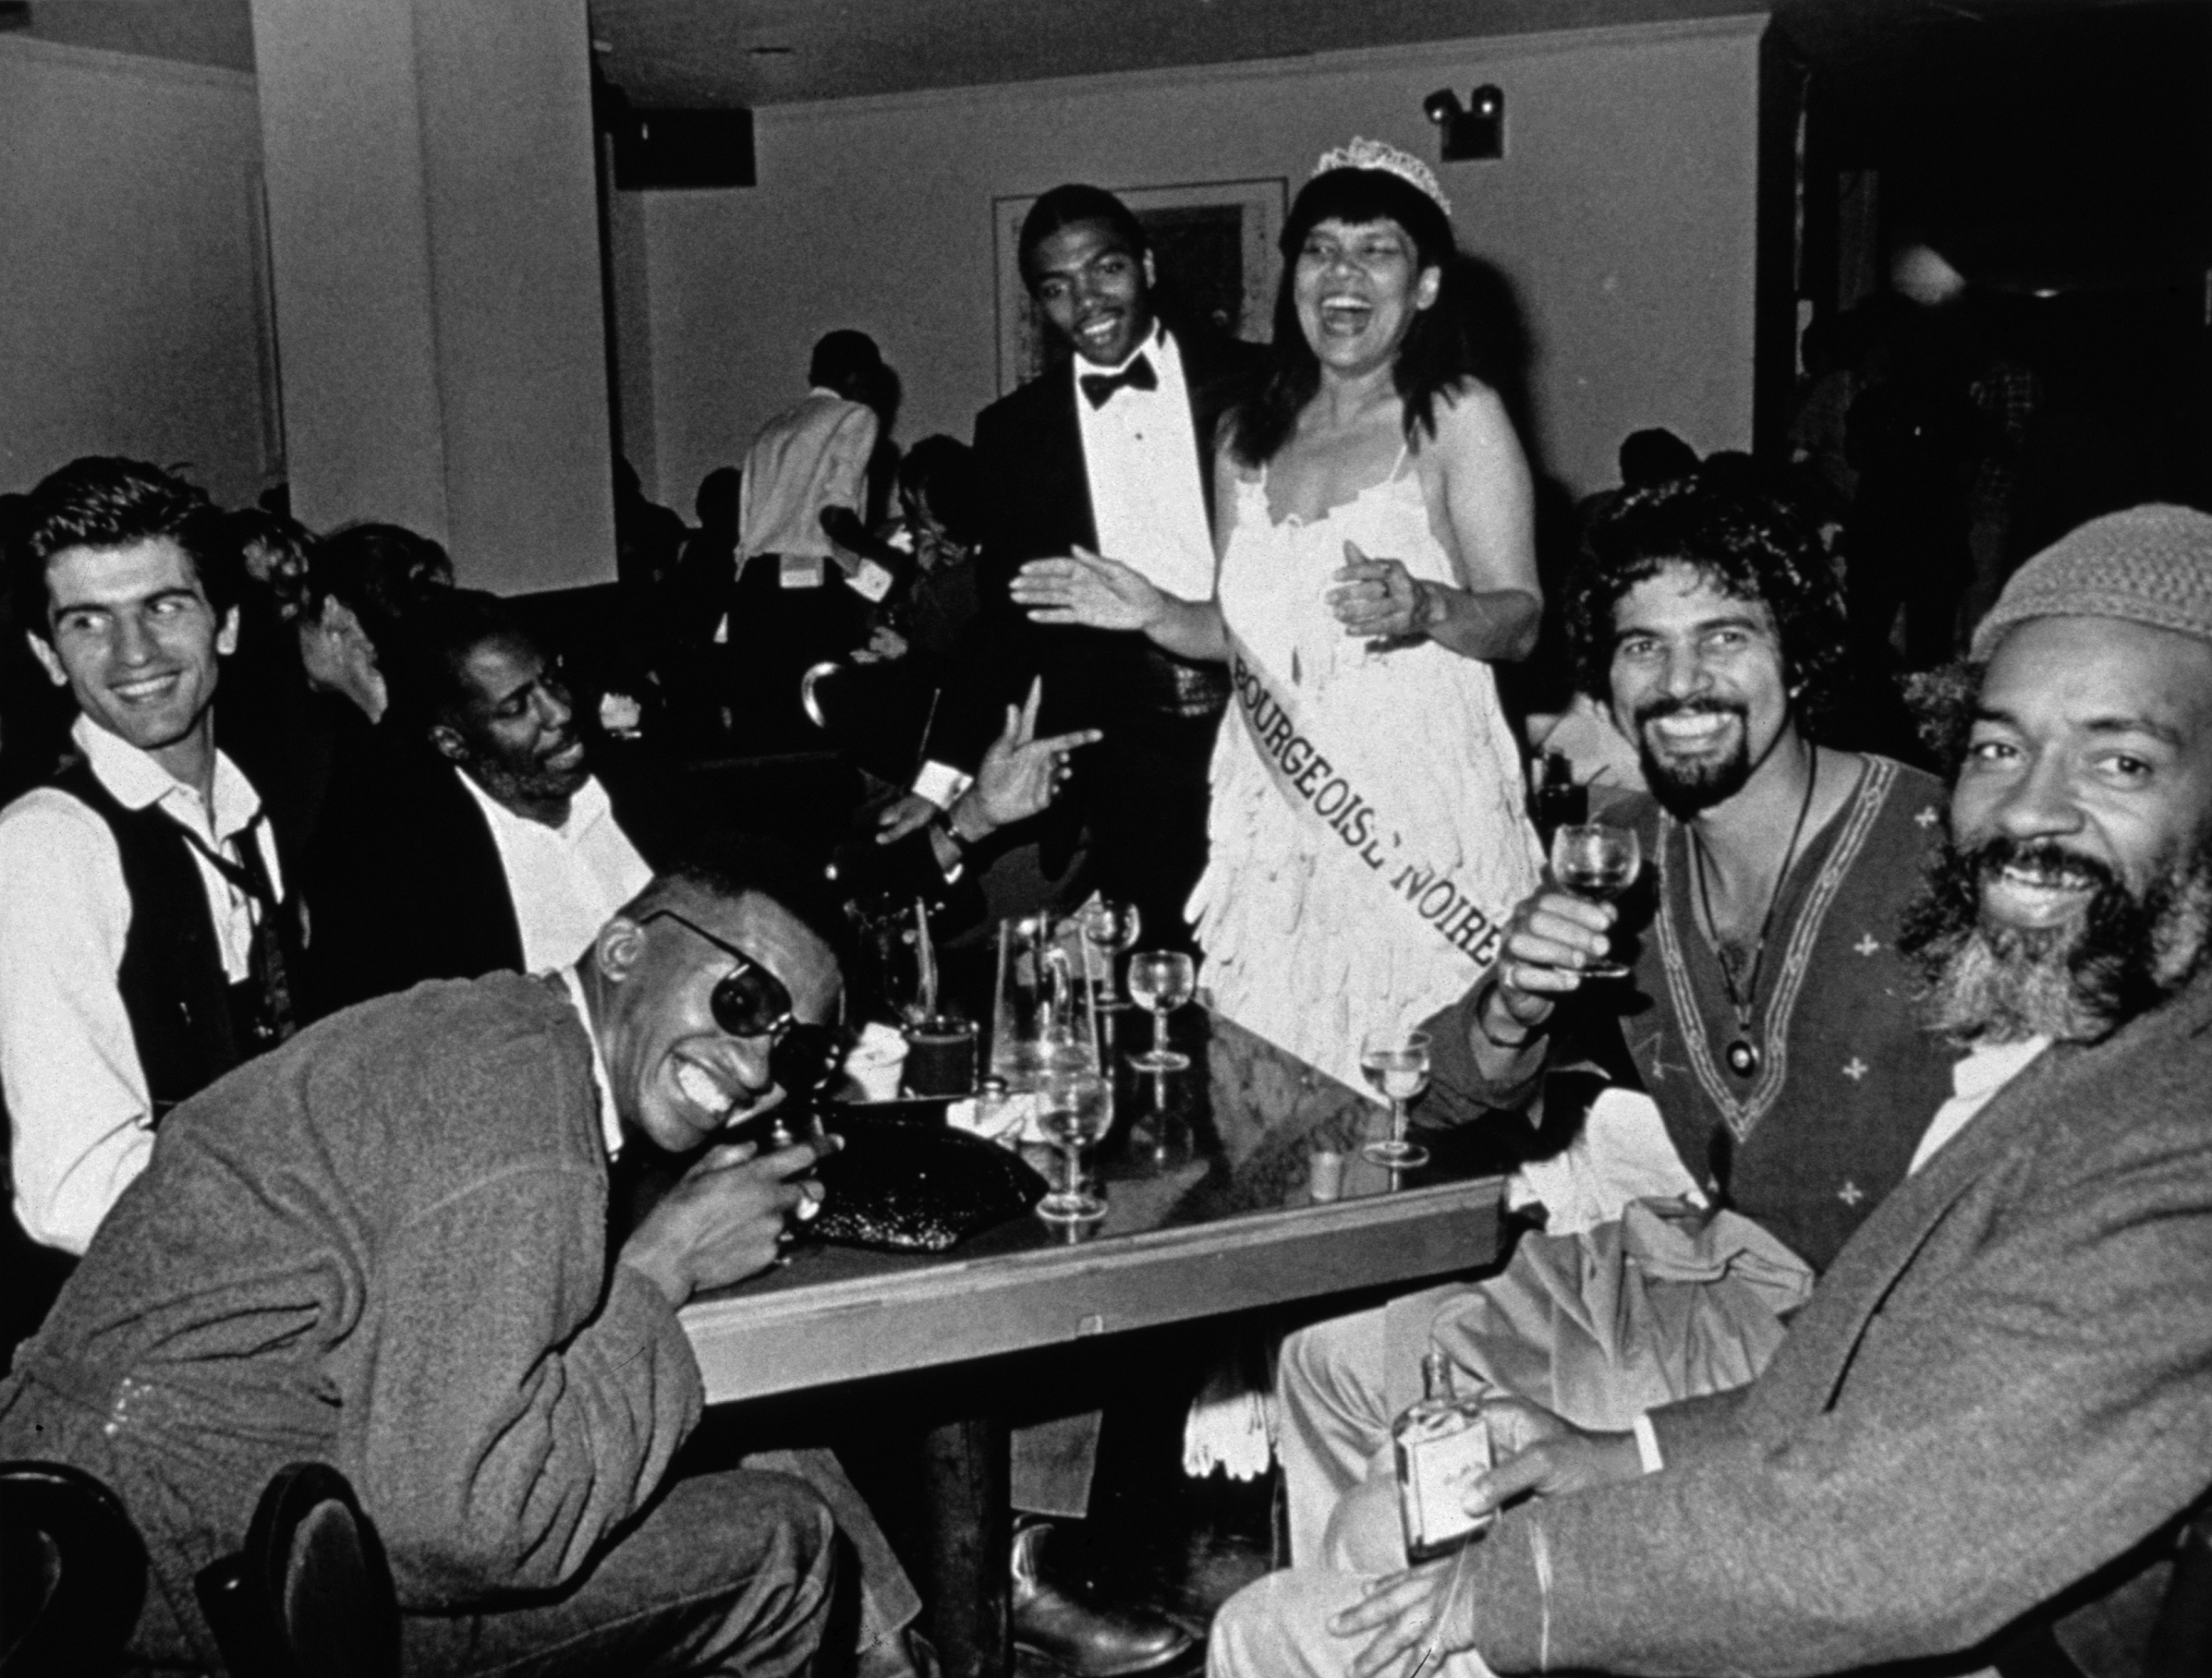 Black-and-white photo of a crowd of people celebrating at a table with drinks in front of them. In the center is a standing Black woman wearing a white dress made of gloves, a tiara, and a pageant sash reading "MLLE BOURGEOISE NOIR."